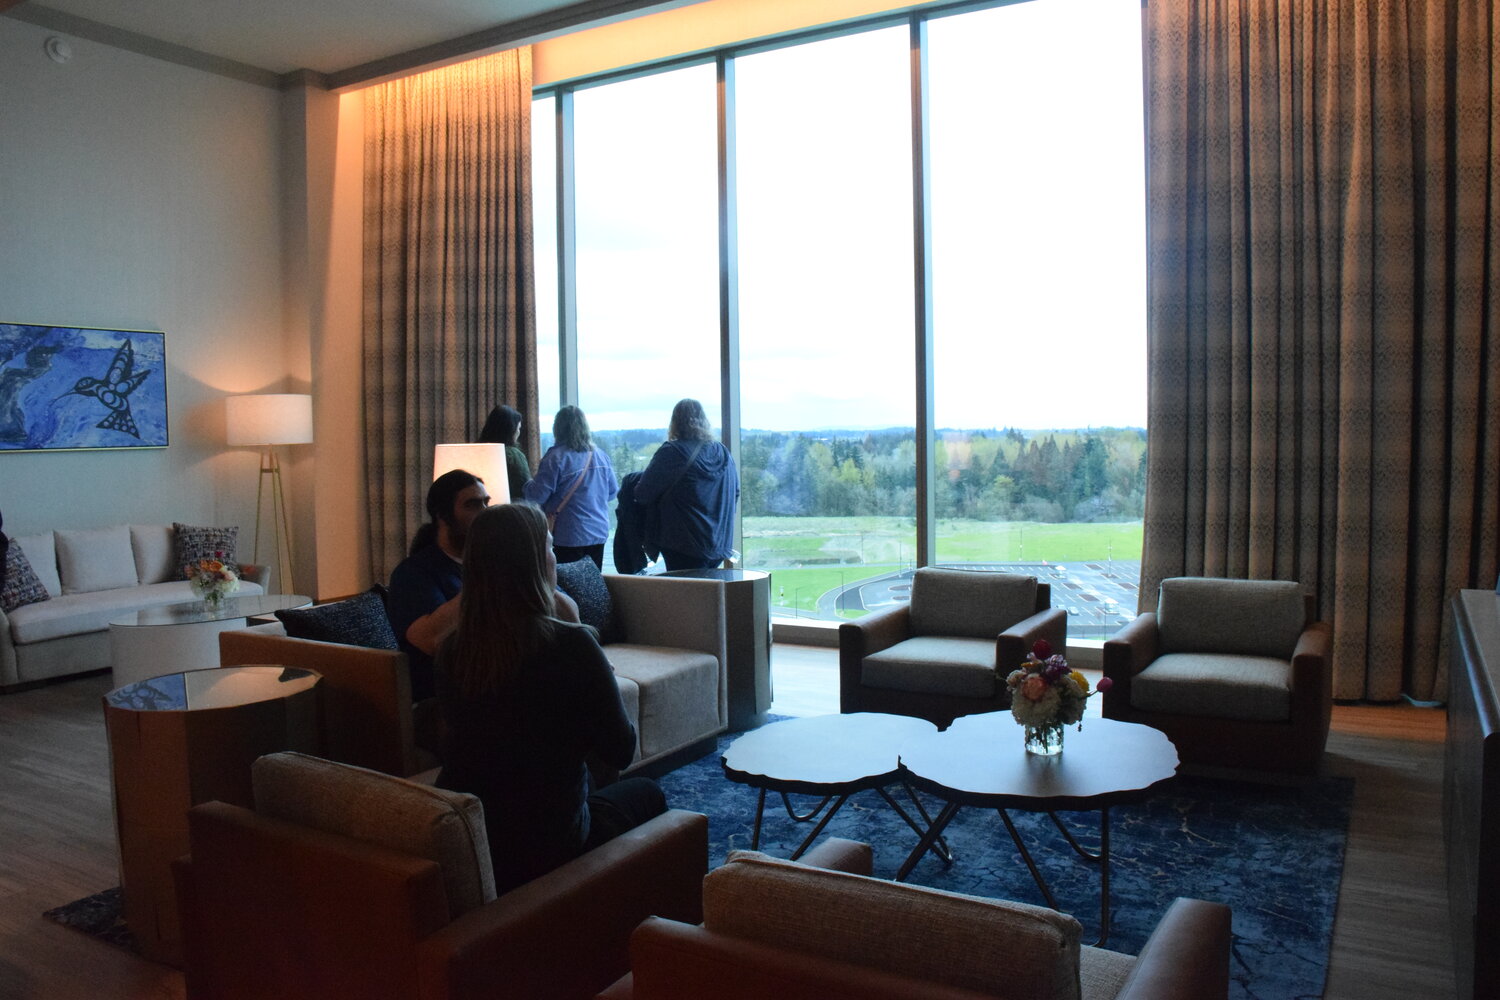 Attendees of a grand opening for ilani’s new hotel take in the sights of one of the nearly 300-room building’s suites following a ribbon cutting for the hotel April 24.